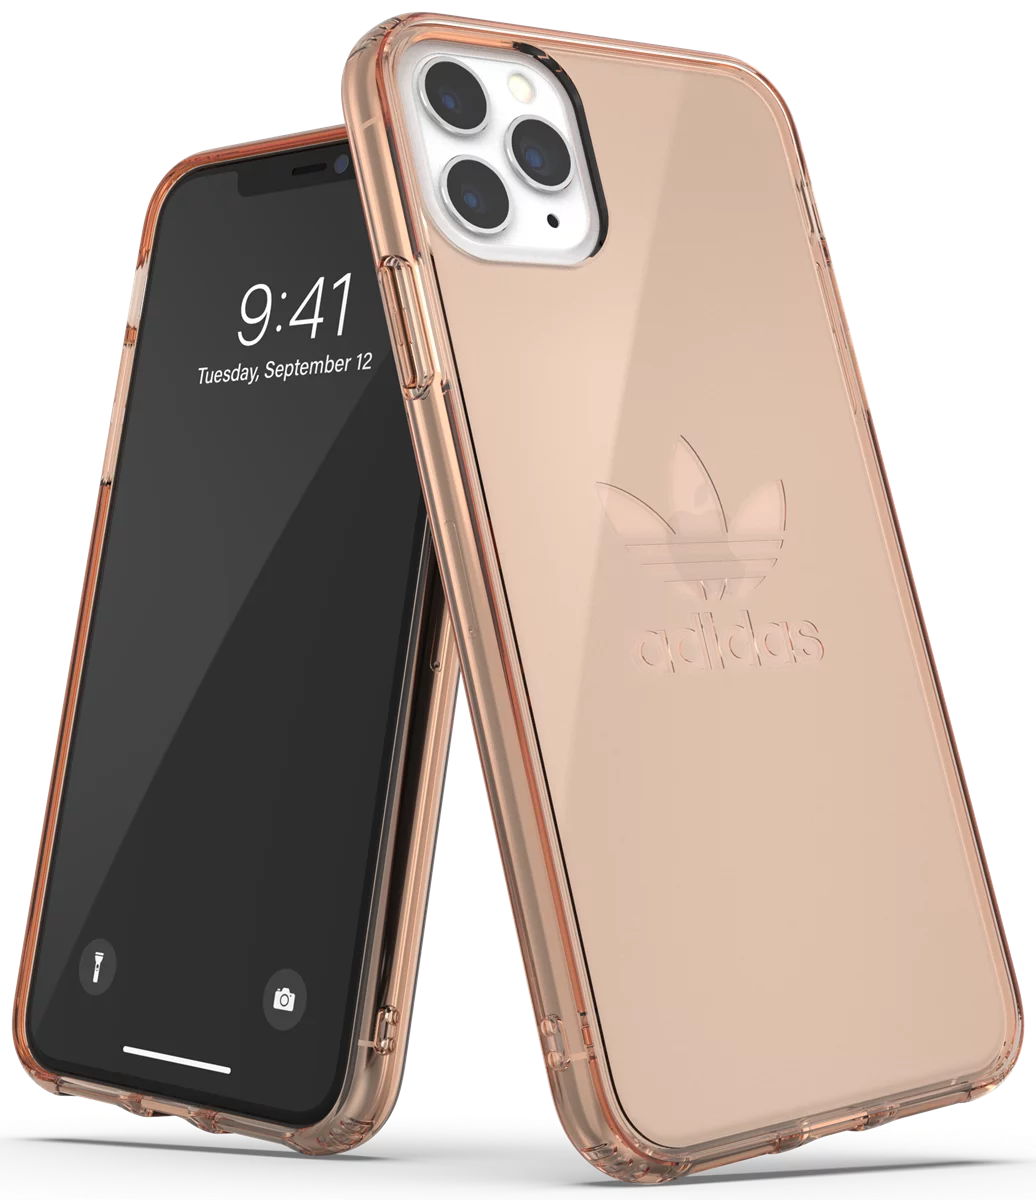 Case Adidas Protective Clear Case Big Logo For Iphone 11 Pro Max Rose Gold Col